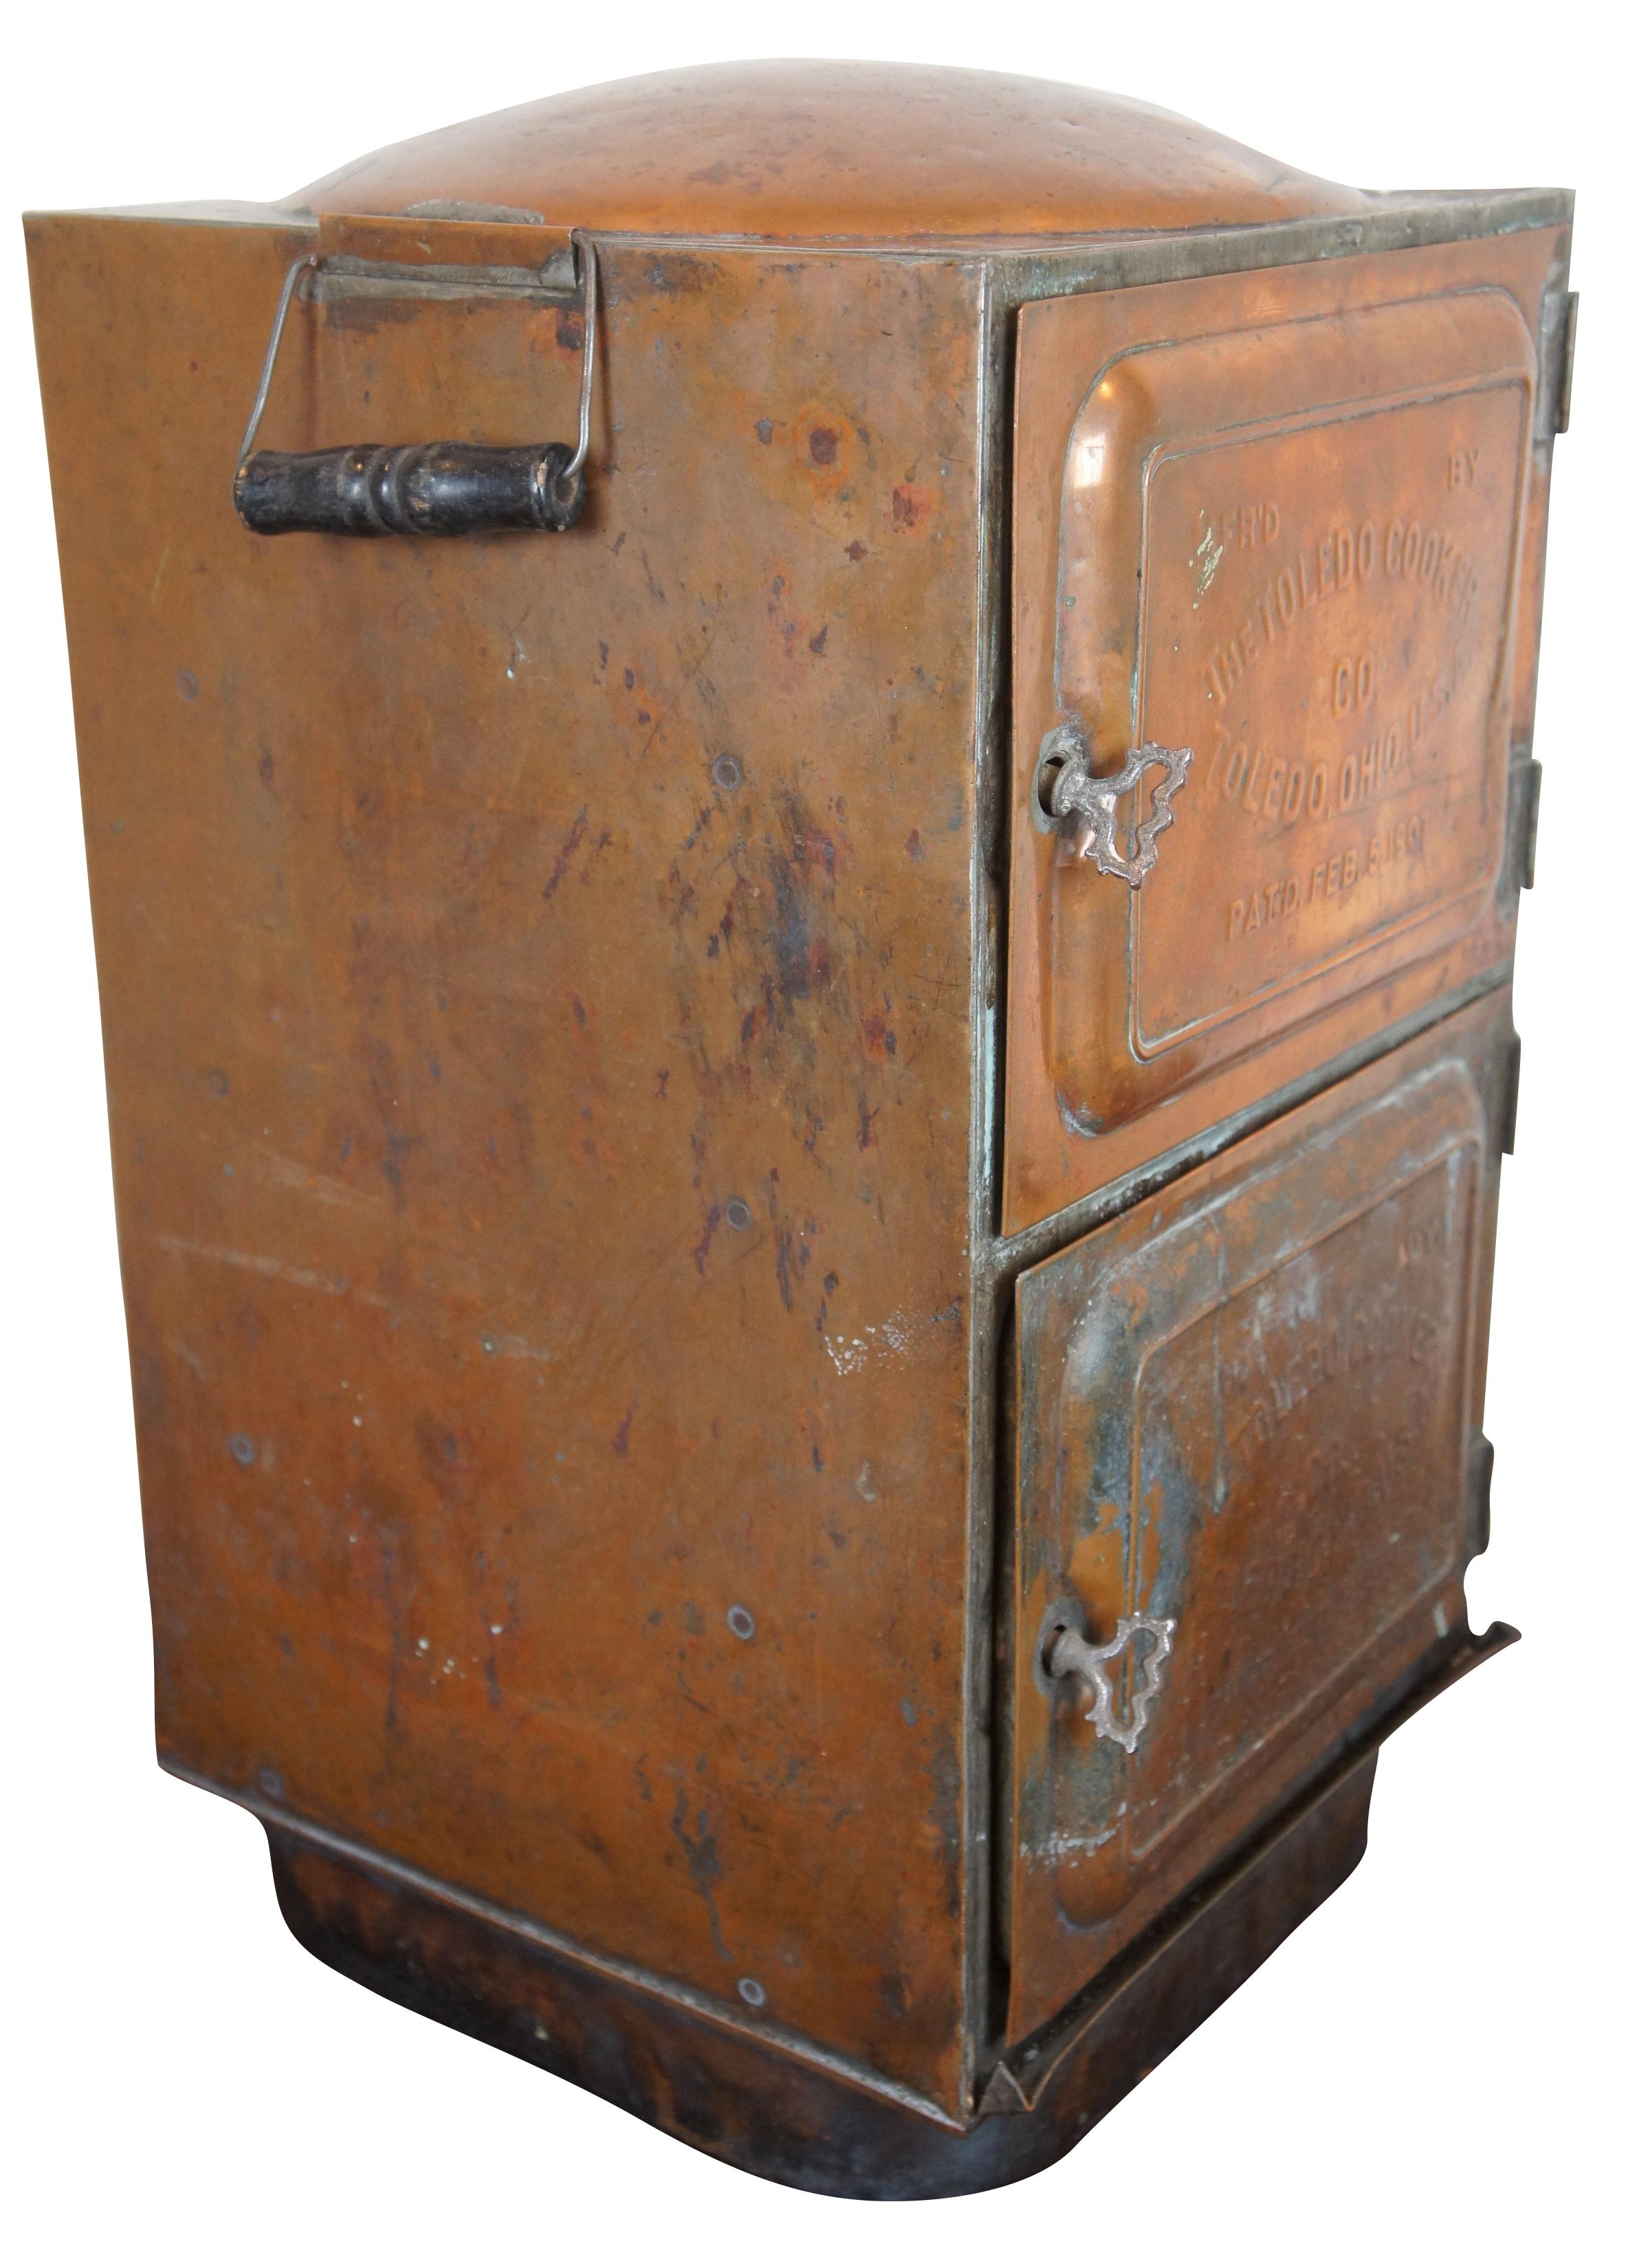 Rare antique copper Toledo cooker canning steamer oven. Made of copper featuring two doors with four interior racks. Circa 1907.
 